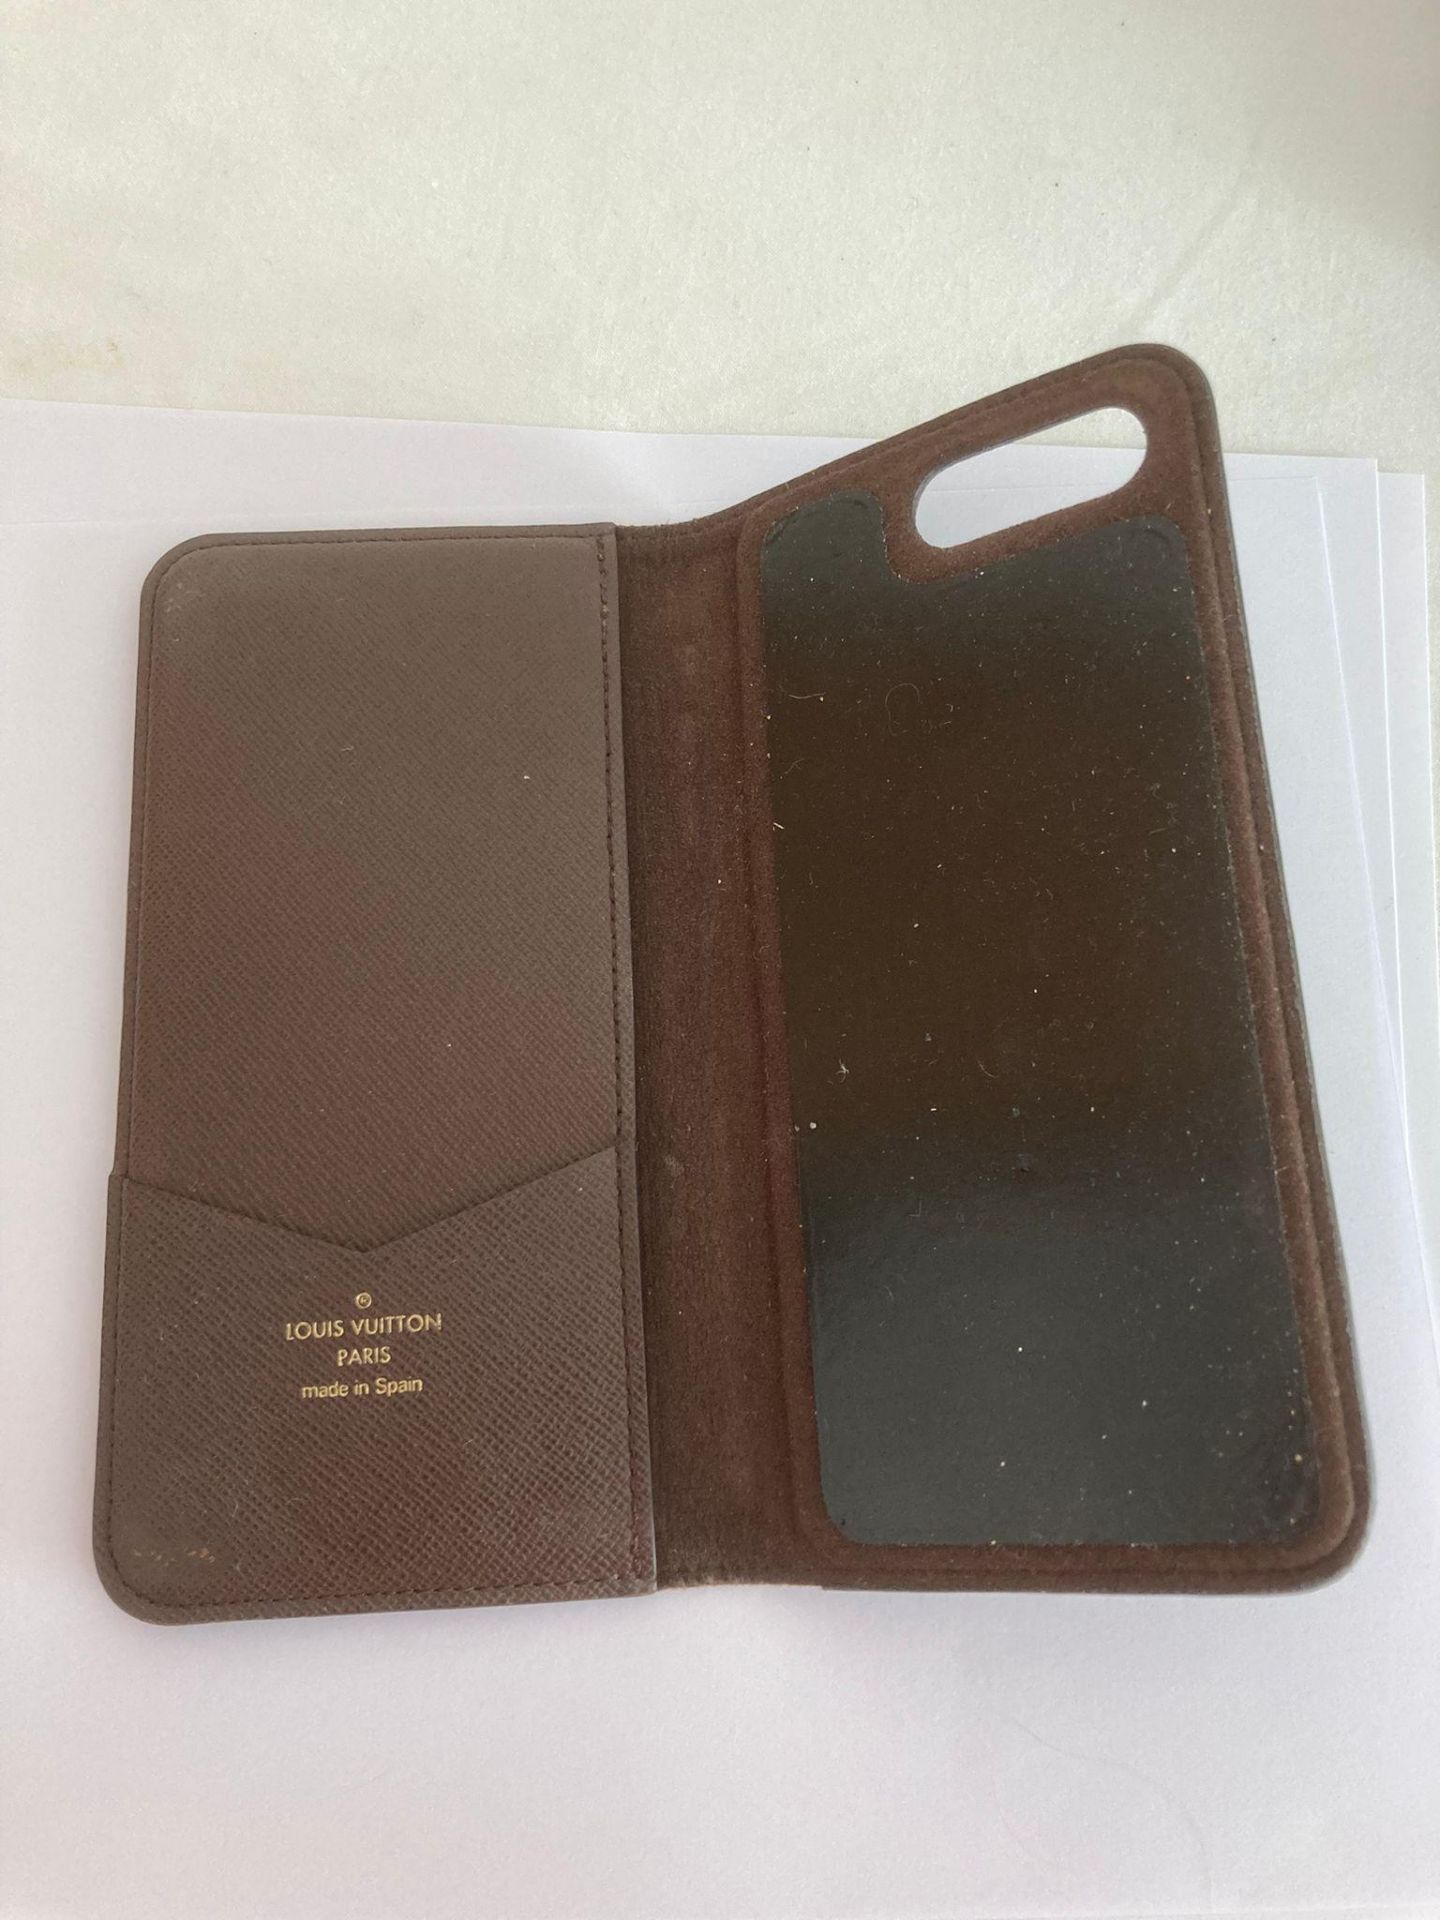 Genuine LOUIS VUITTON folio phone case for iPhone 7 or similar. Finished in brown leather with the - Bild 3 aus 3